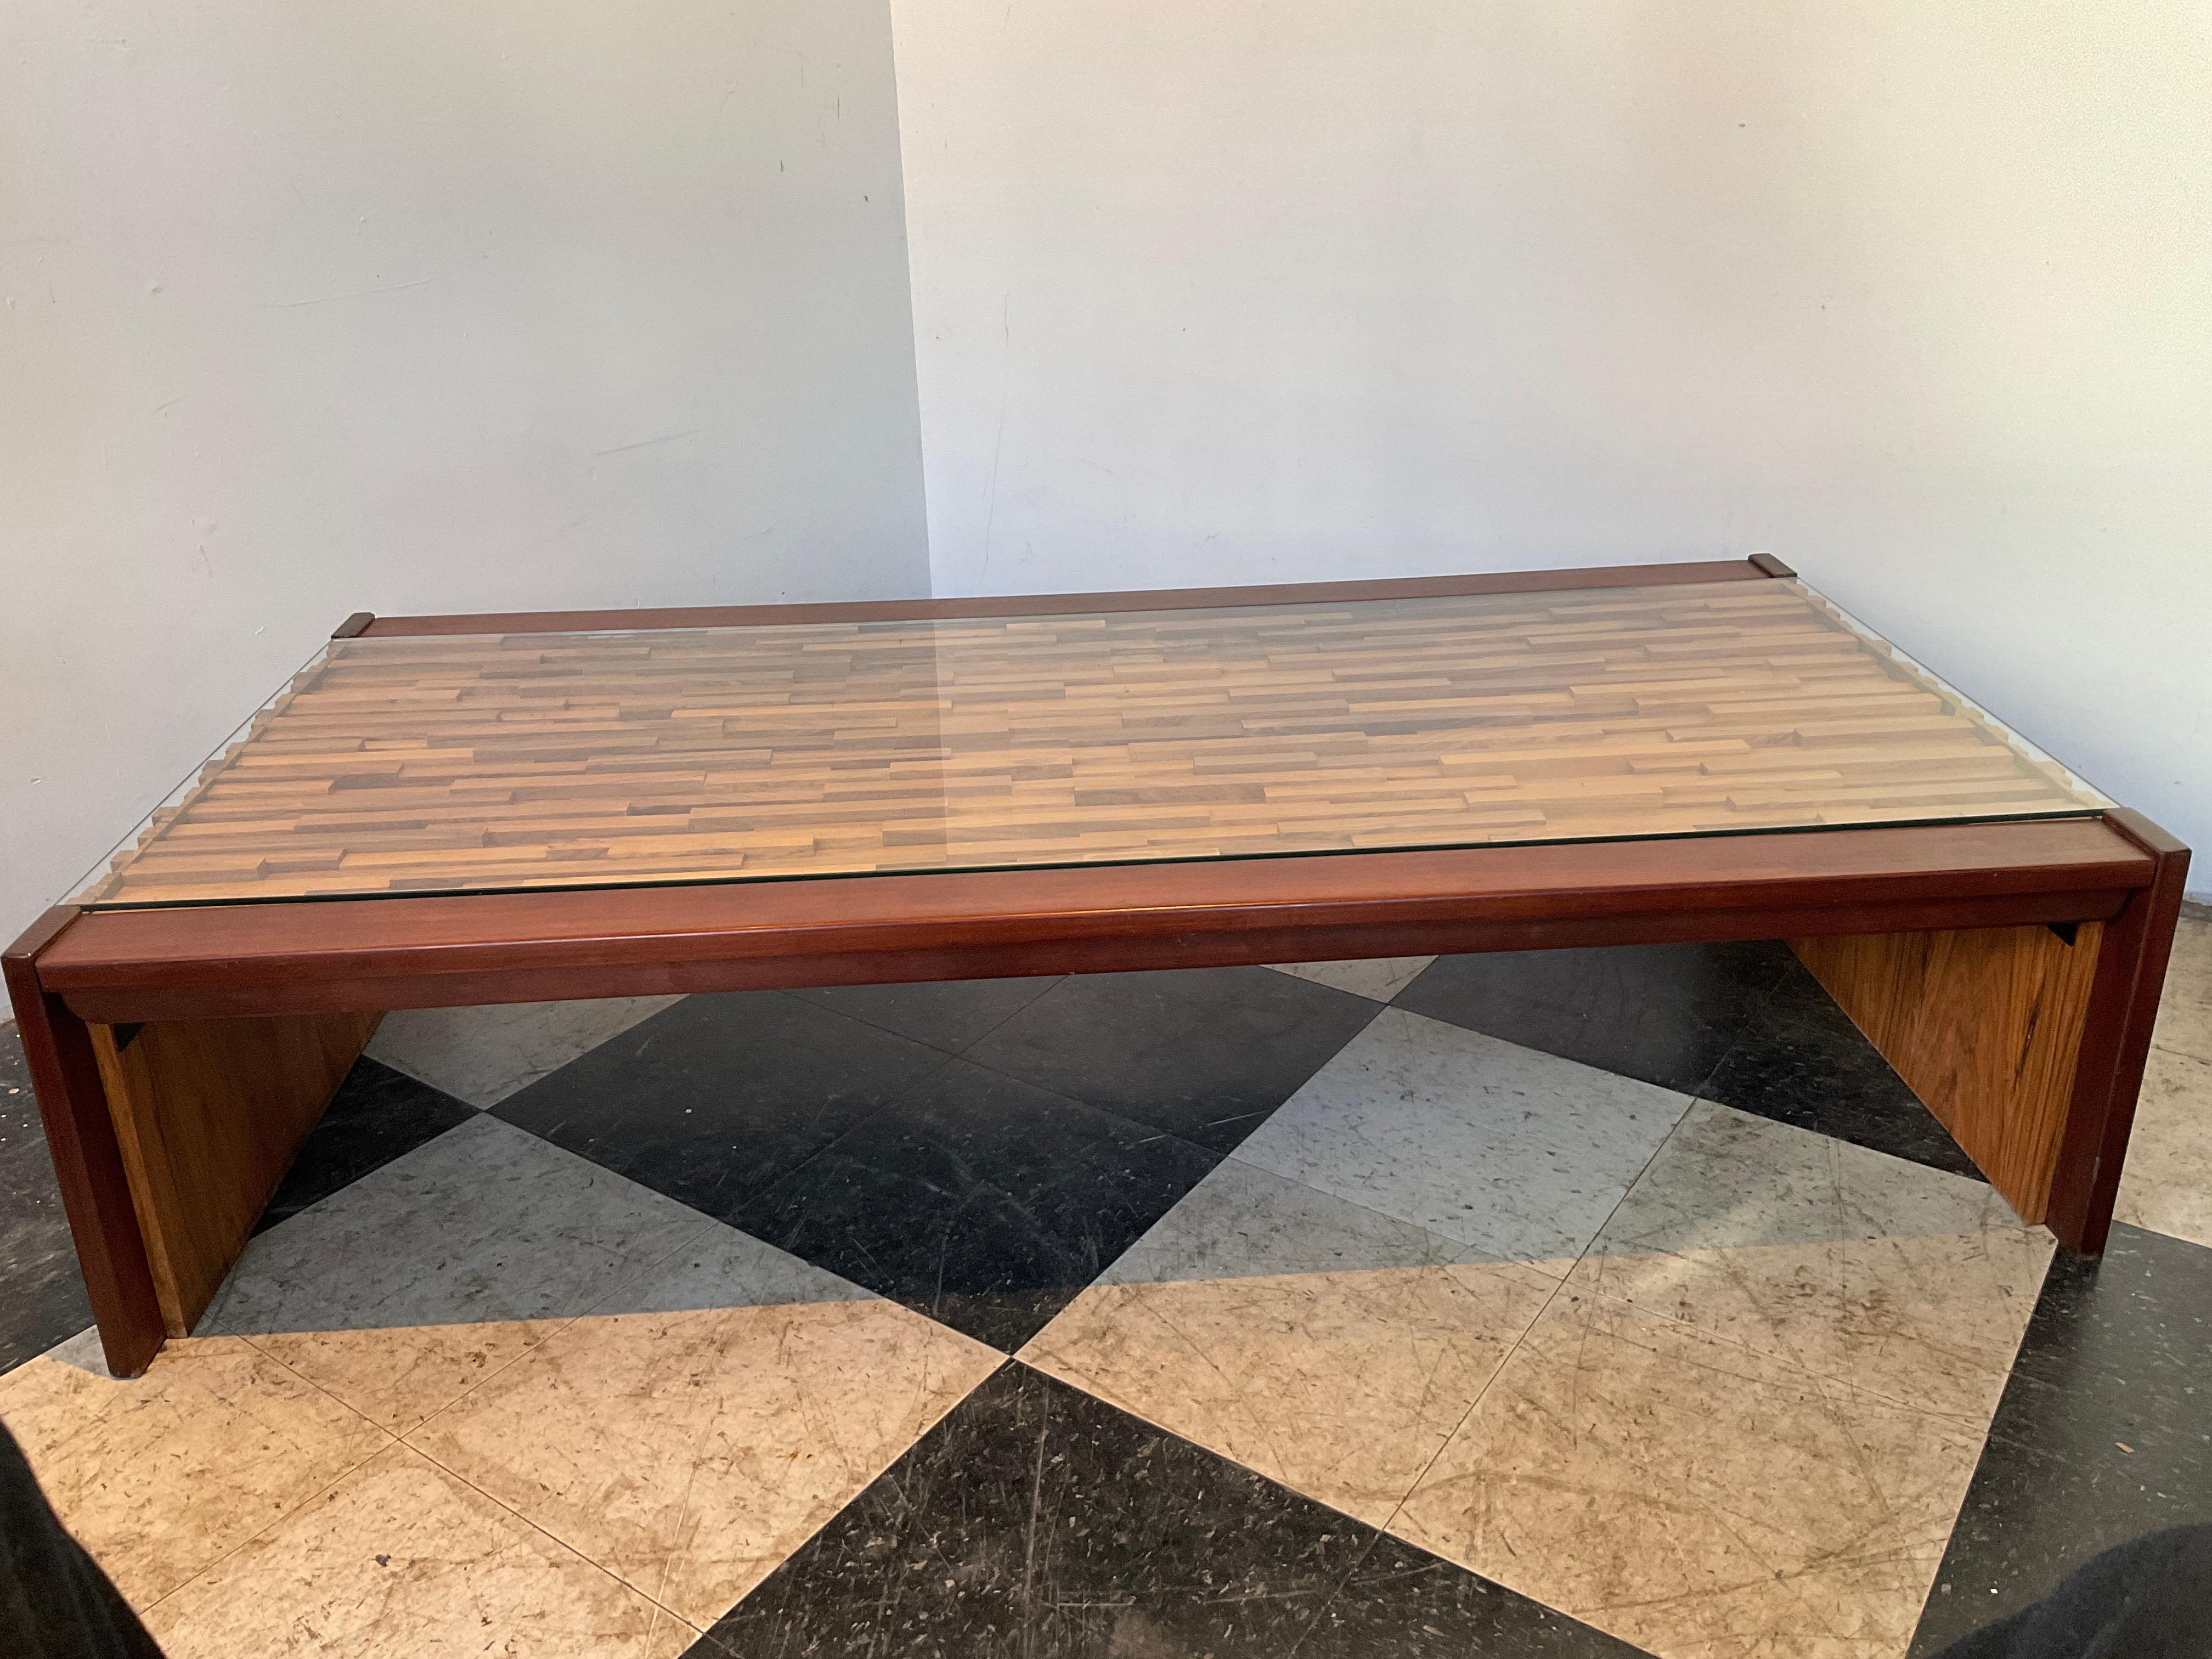 1980s Perceval Lafer wood coffee table. Sides are collapsible.
Glass top.